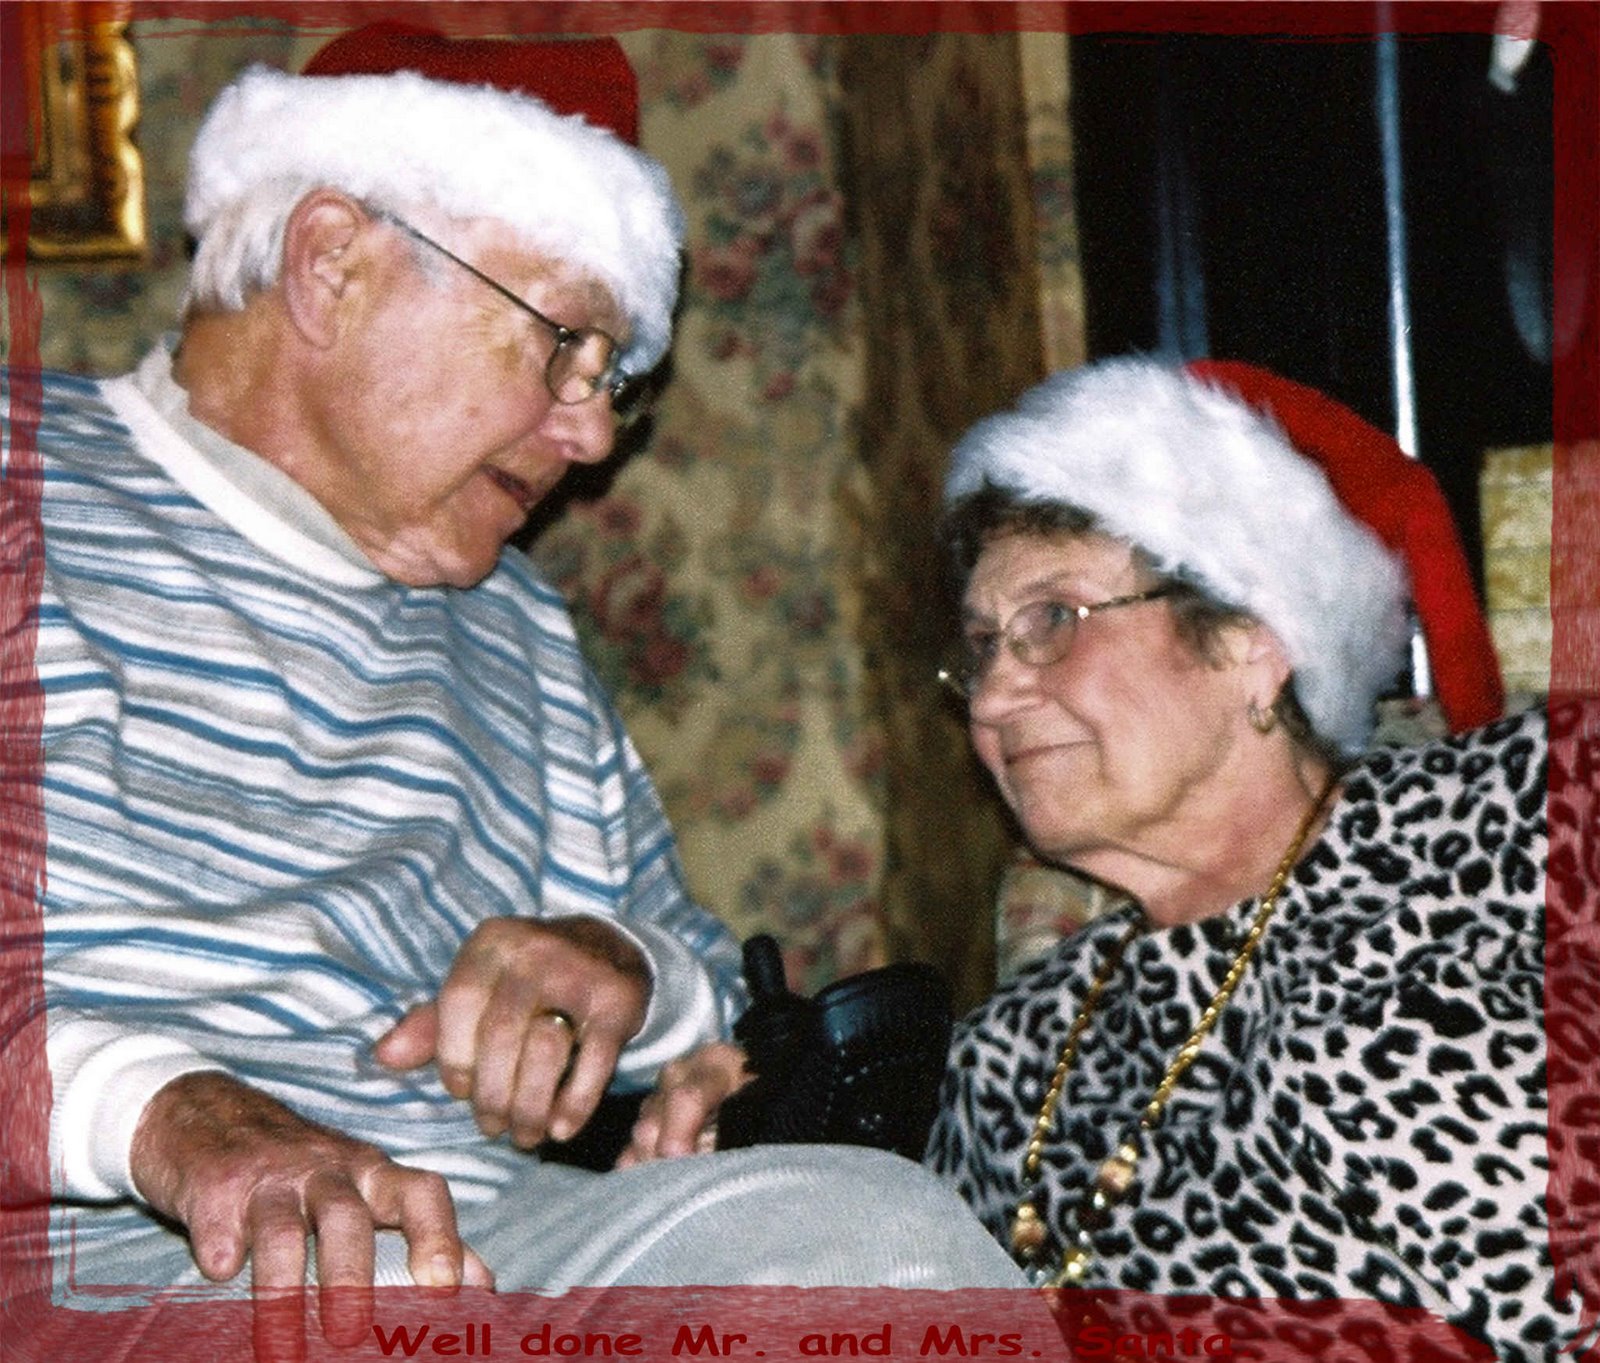 [Mr.+and+Mrs+Claus+2004.jpg]